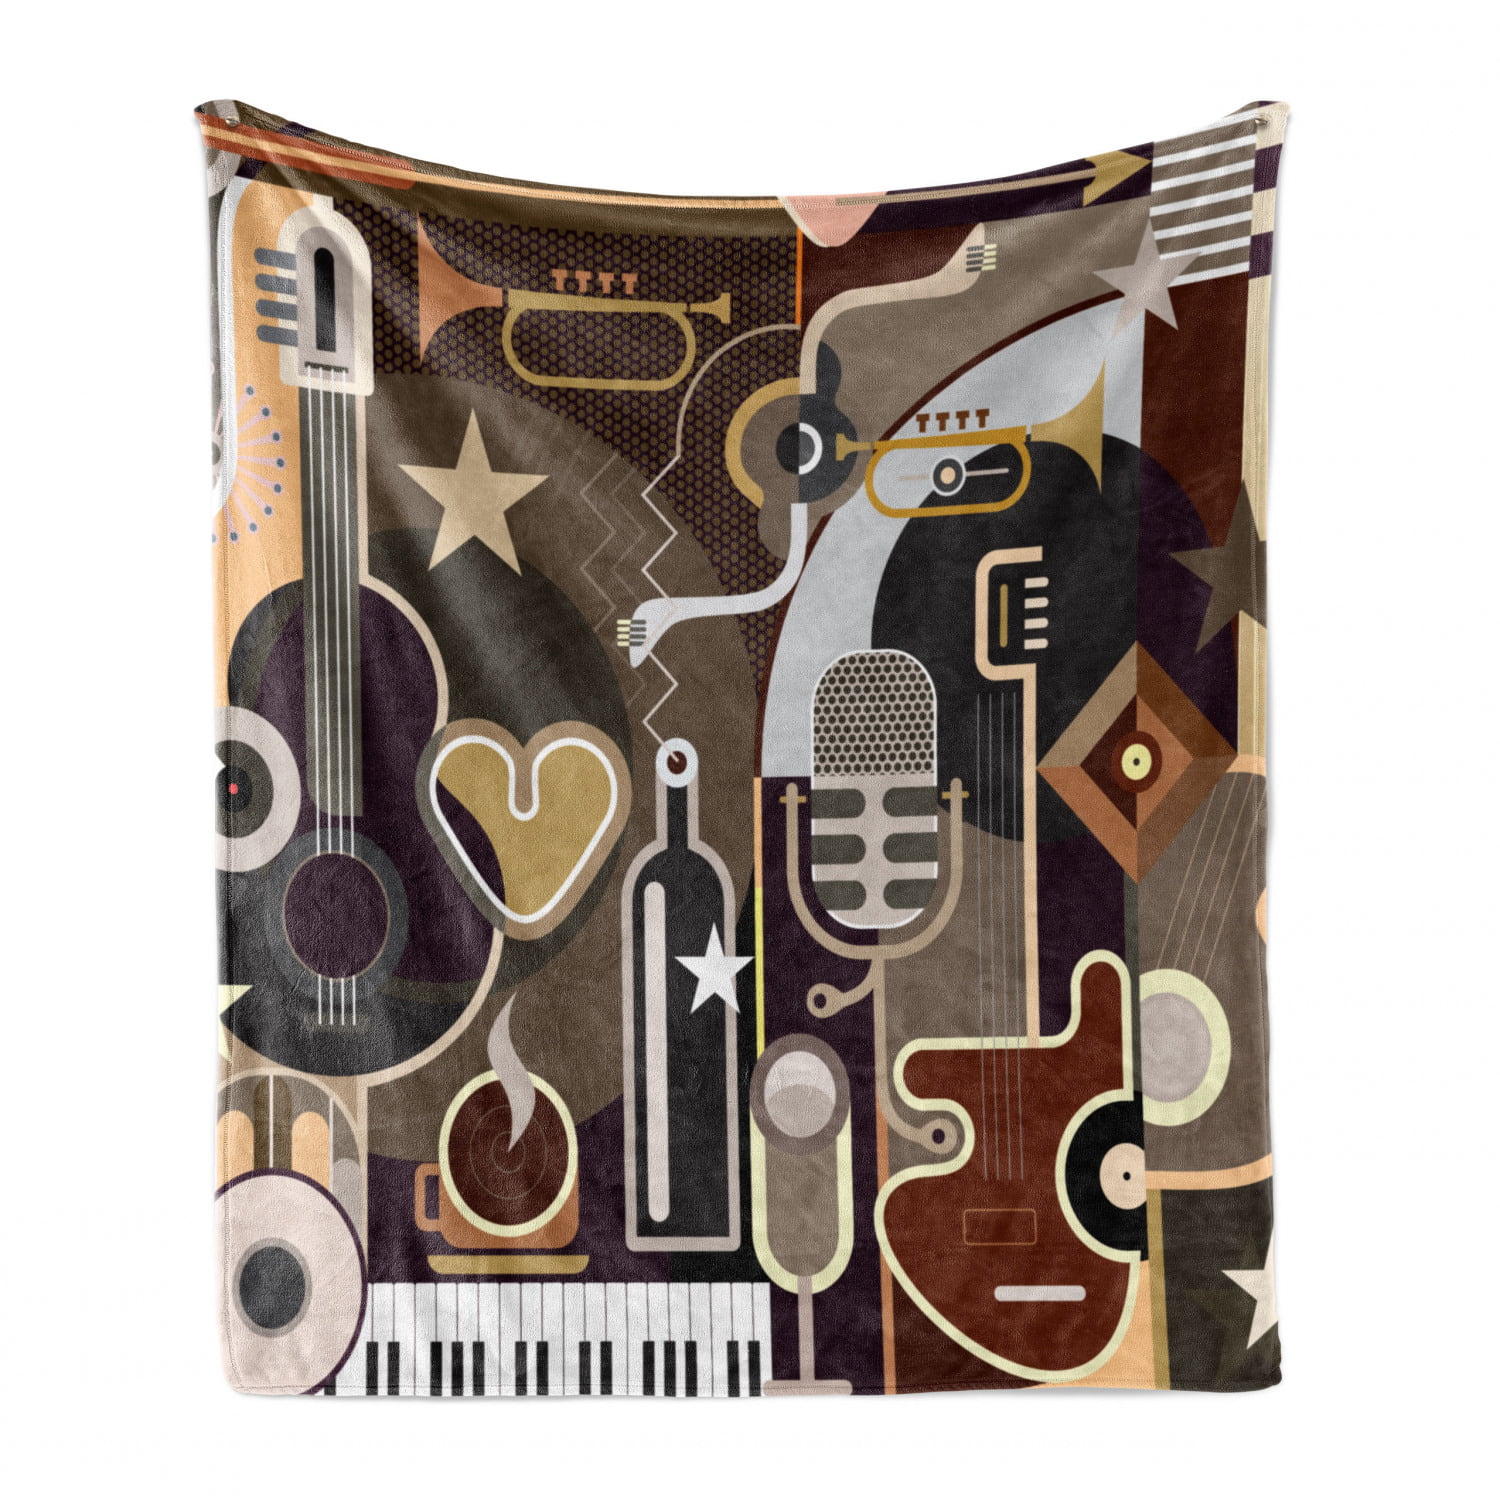 Comfortable Thin Flannel Blanket,60x80 Inch,air Conditioner Blanket,Sheet Music Guitar